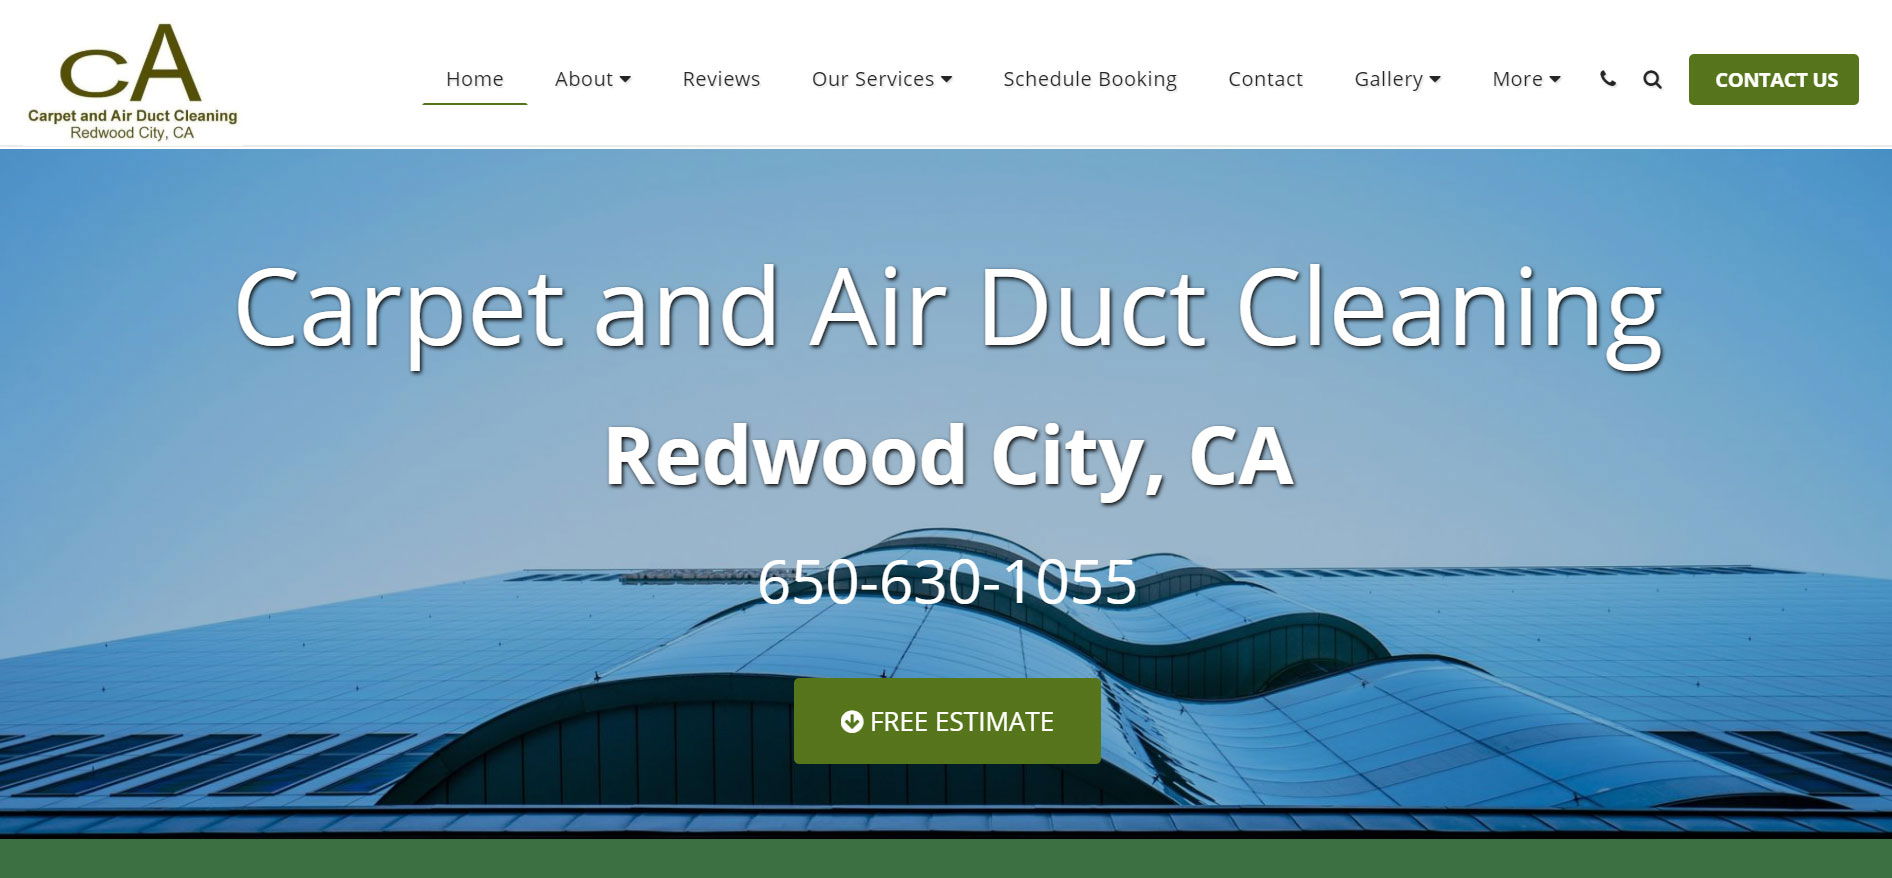 Carpet and Air Duct Cleaning